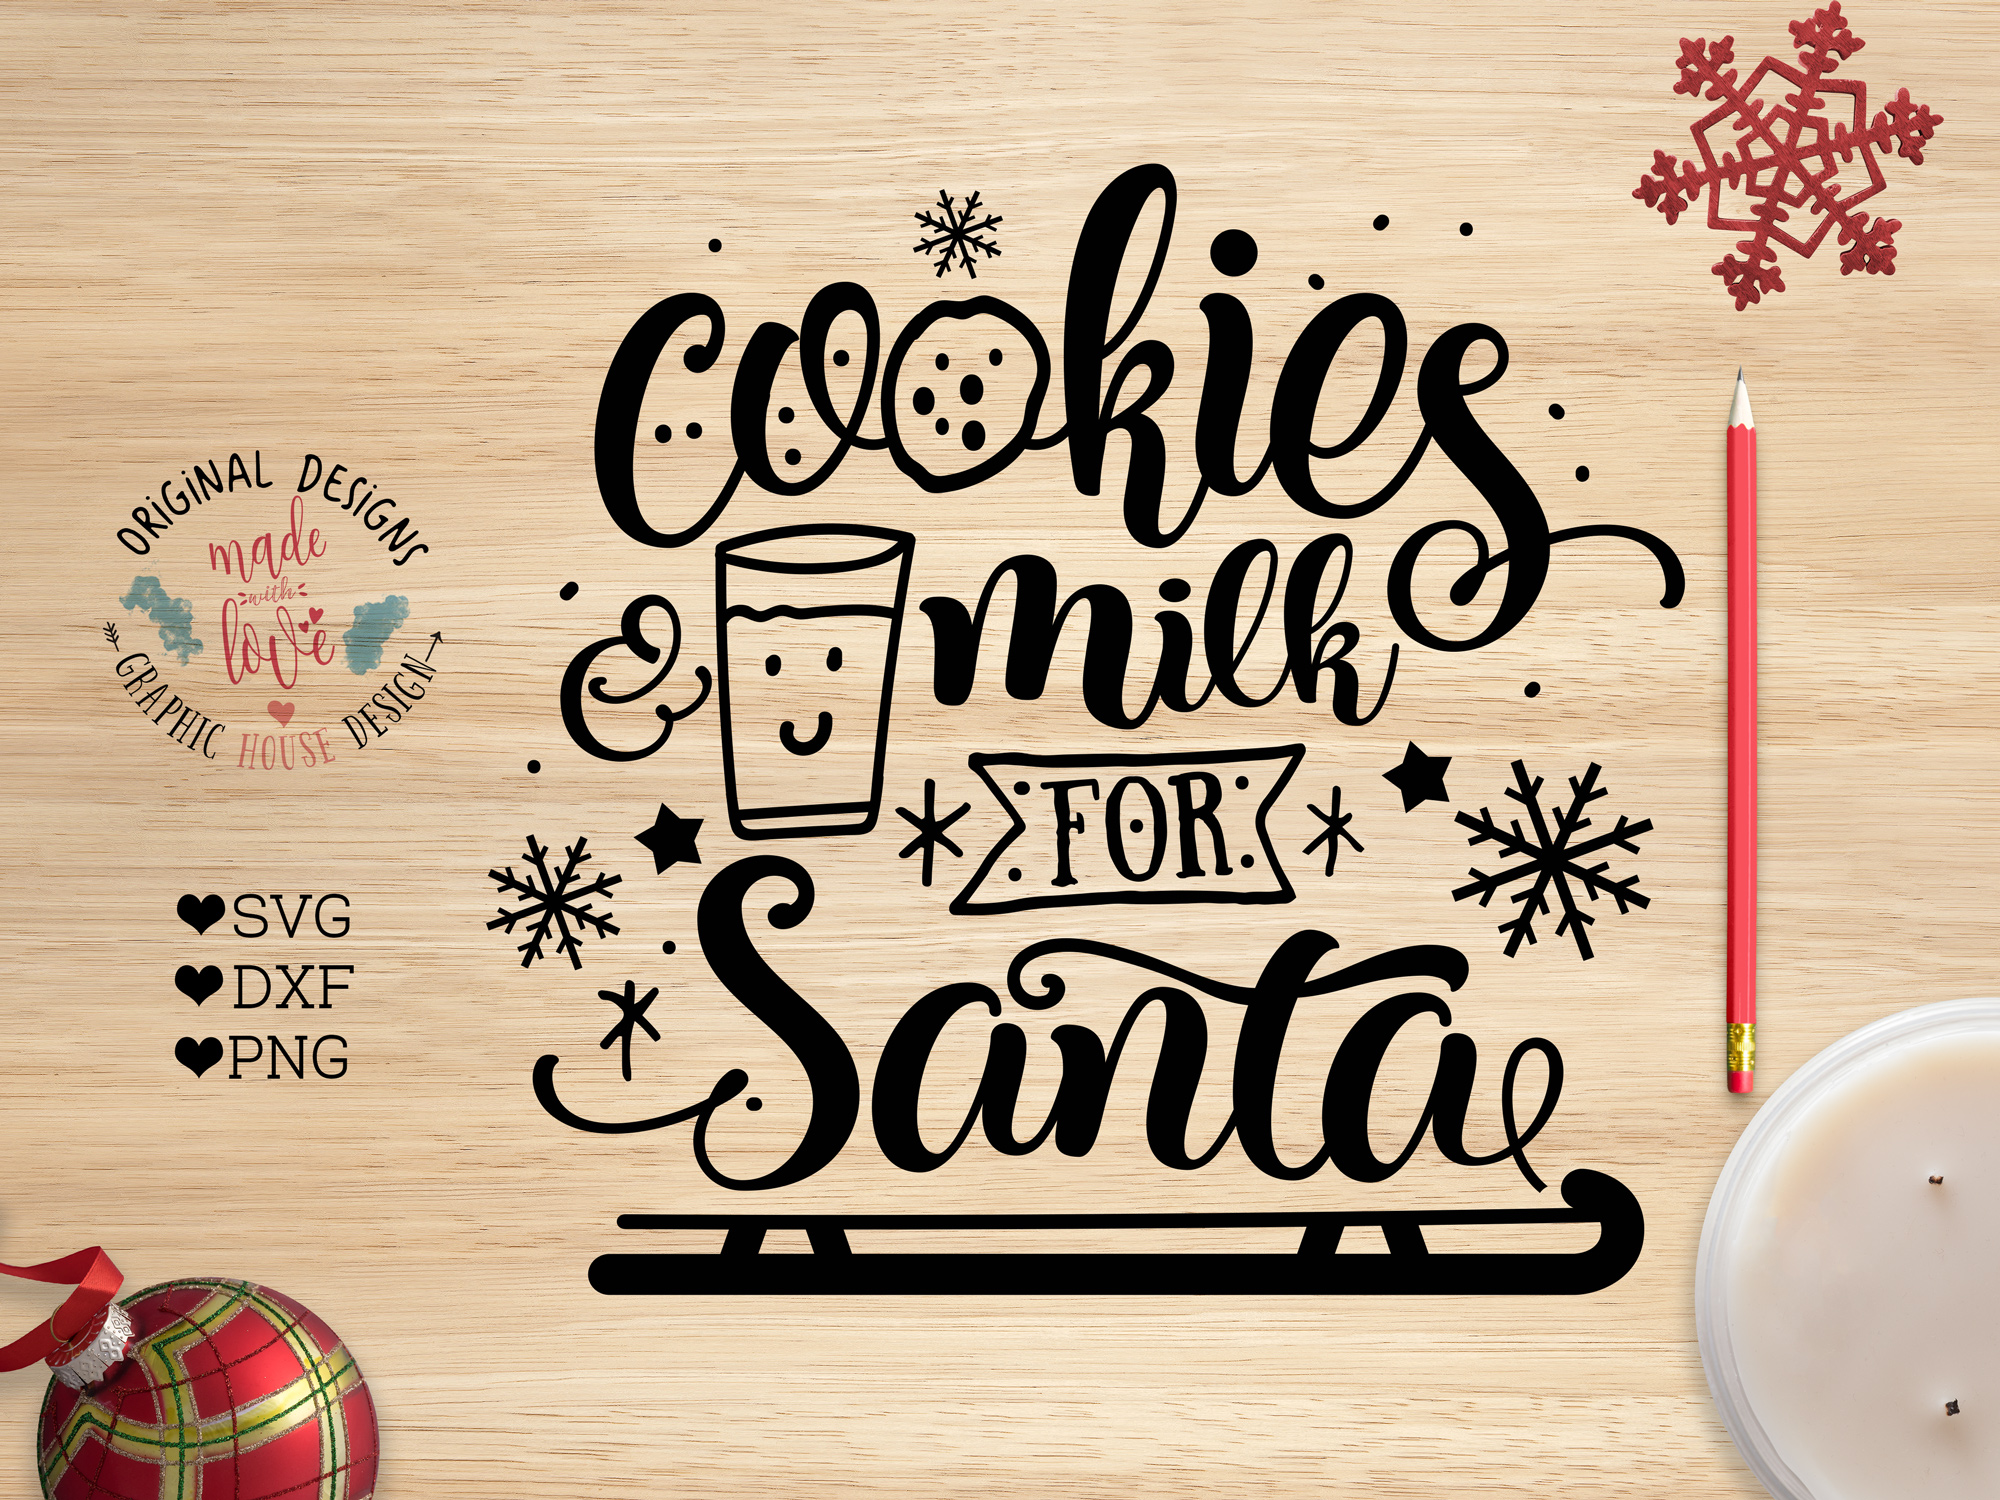 Download Cookies and Milk for Santa Christmas Cut File SVG, DXF ...